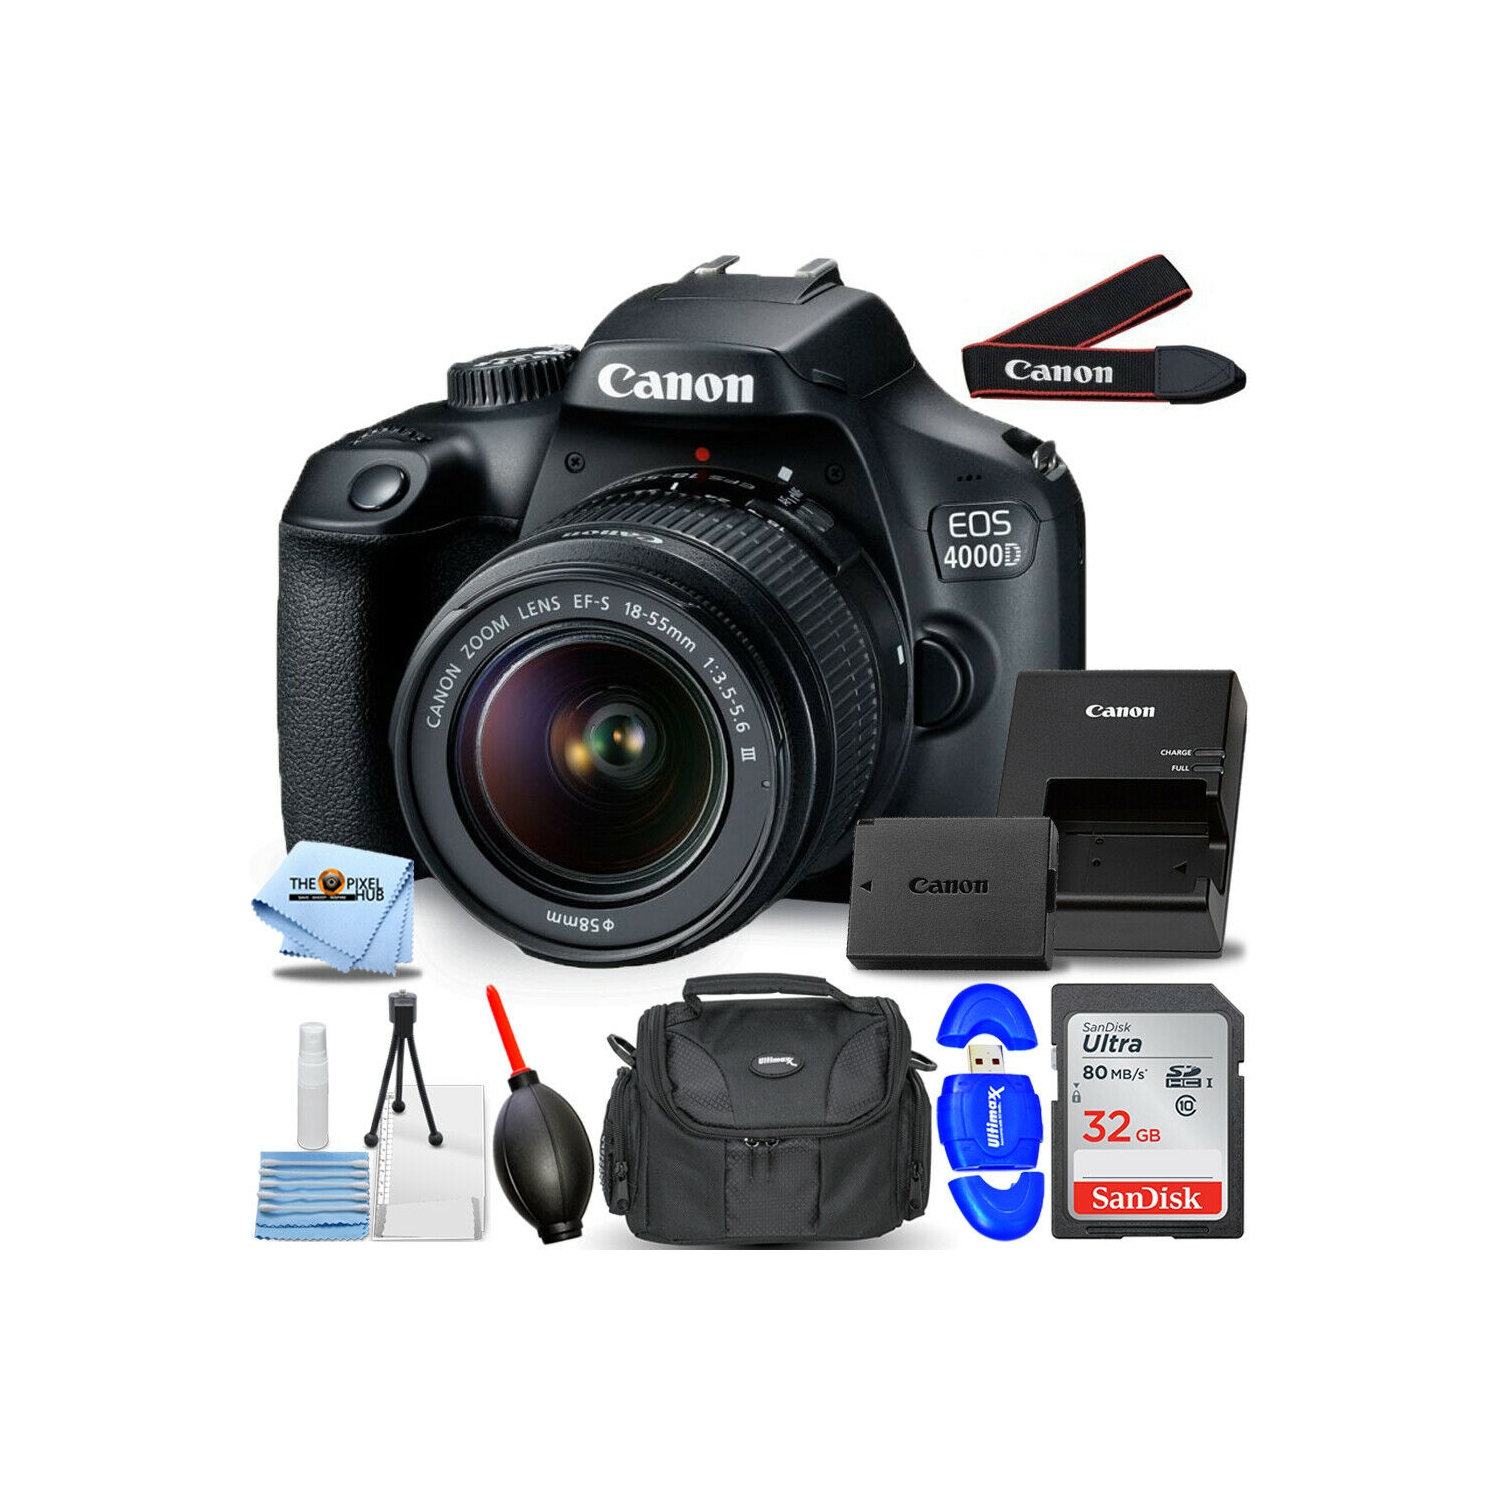 Canon EOS 4000D / Rebel T100 with EF-S 18-55mm III Lens - 7PC Accessory Bundle Includes: Sandisk Ultra 32GB SD, Memory Card Reader, Gadget Bag, Blower. Microfiber Cloth and Cleaning Kit